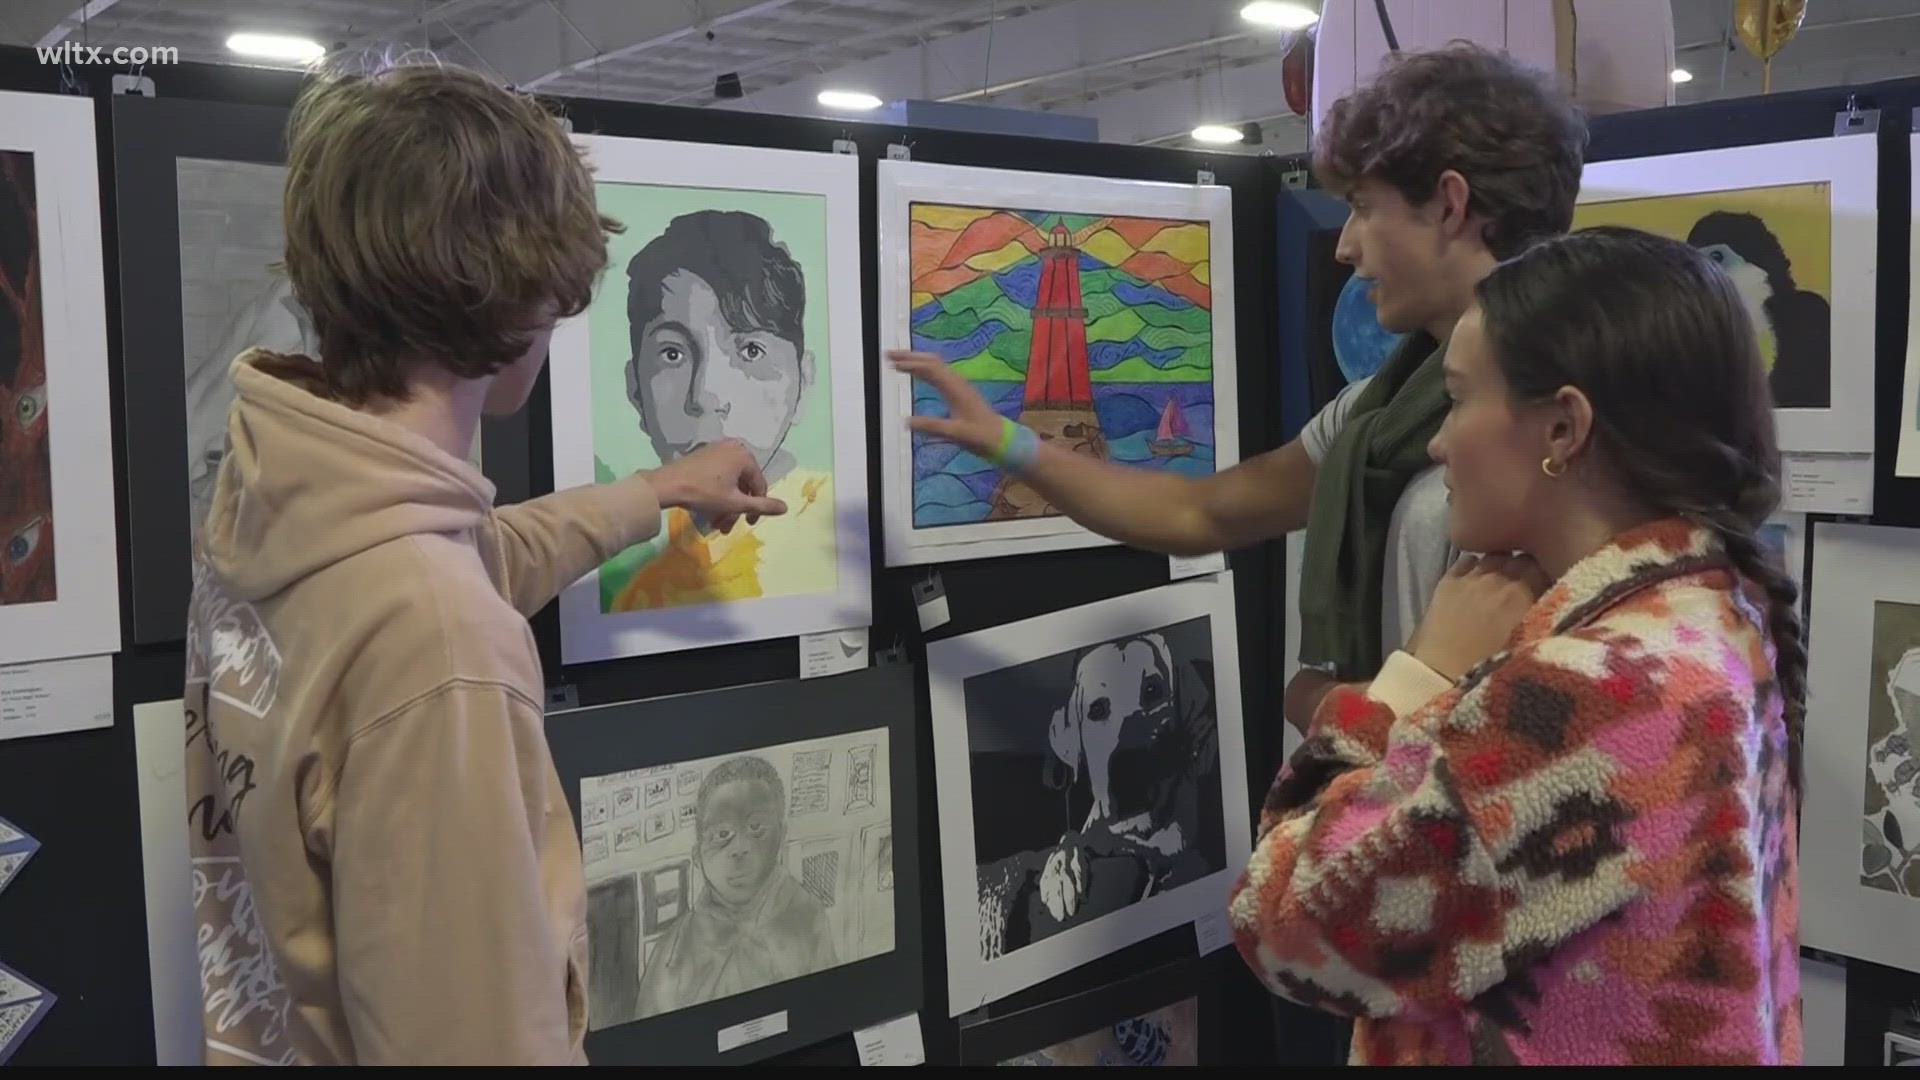 K-12 students' artwork is on display at the South Carolina State Fair for all to see.